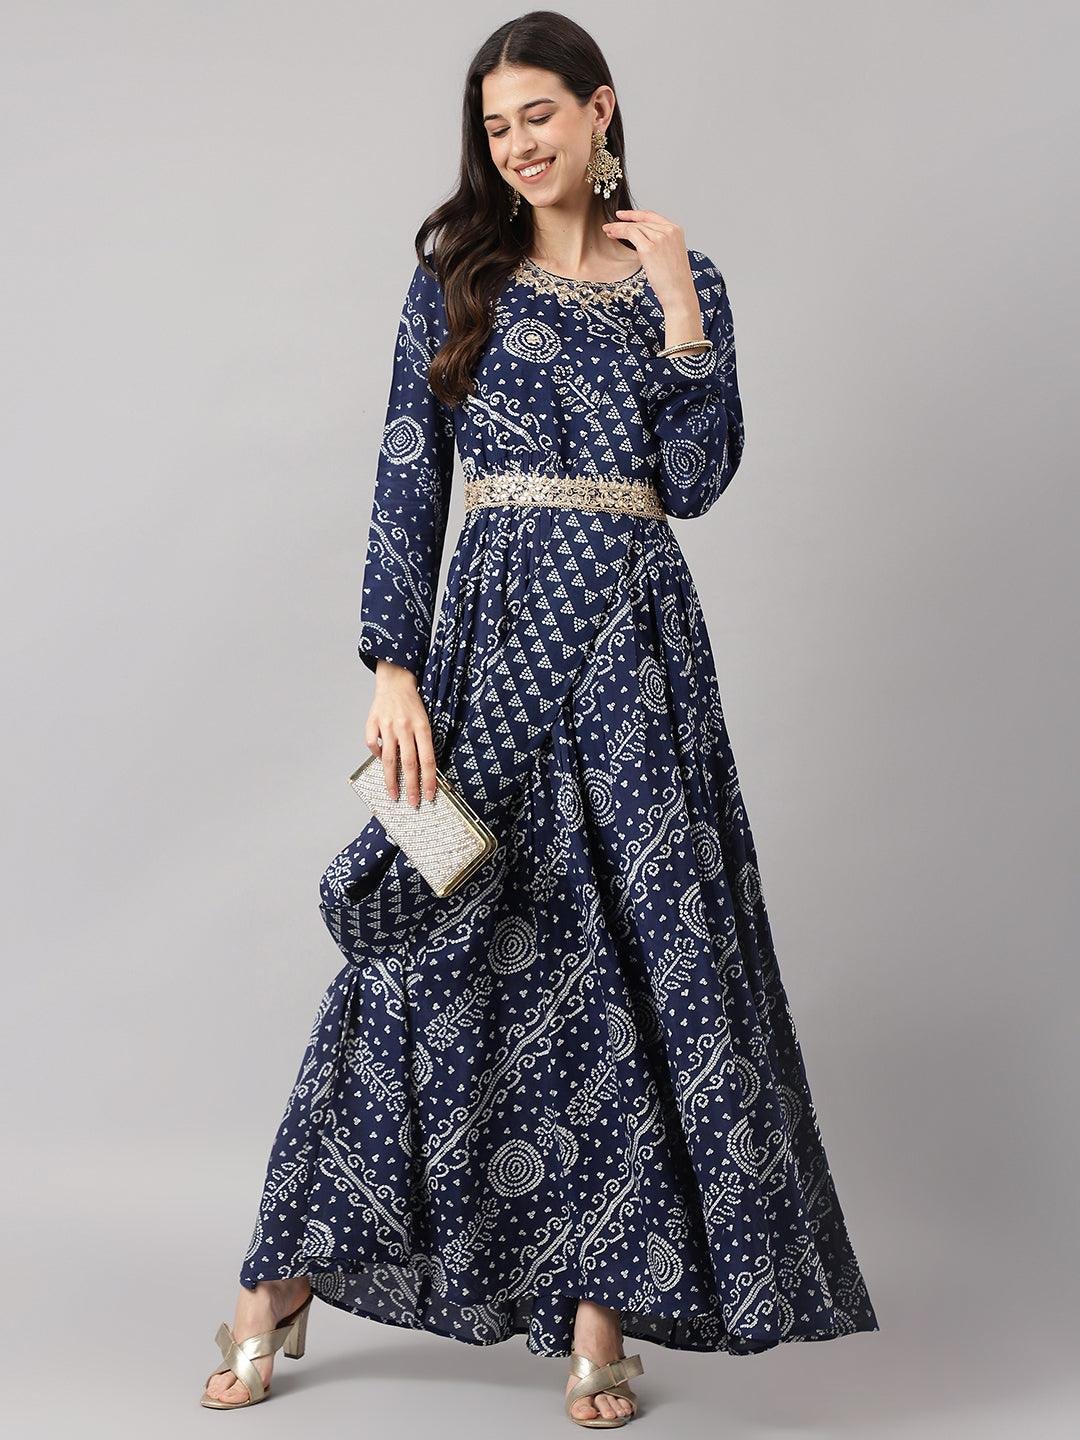 NEW Bandhani Printed Padded One Piece Outfit With Embroidery & Tassels  READY TO WEAR Dress – Prititrendz